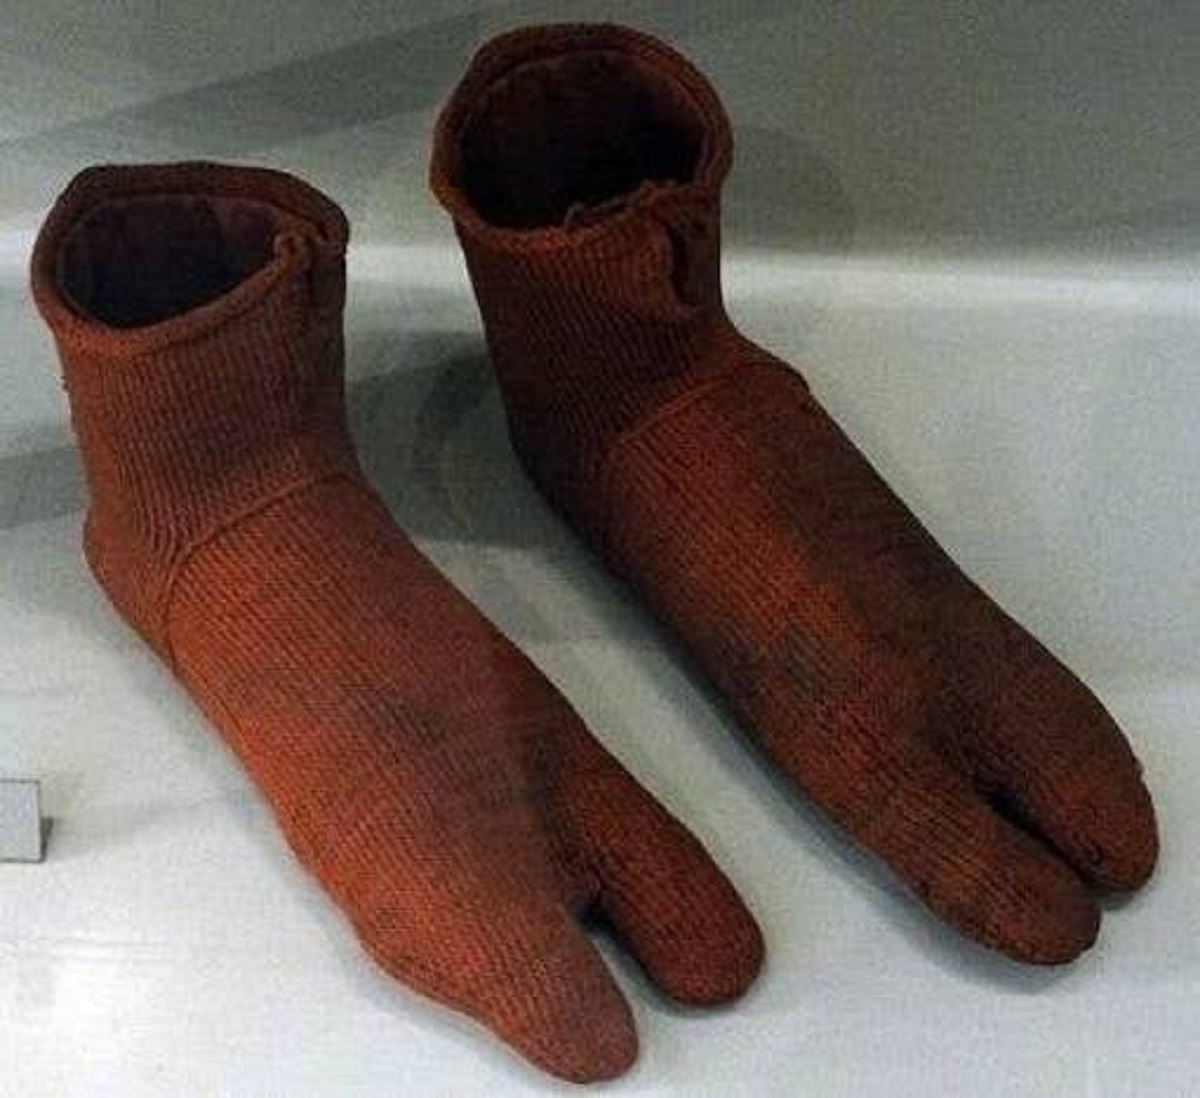 This is a pair of one of the earliest discovered pairs of socks, made in Egypt in the 5th century: